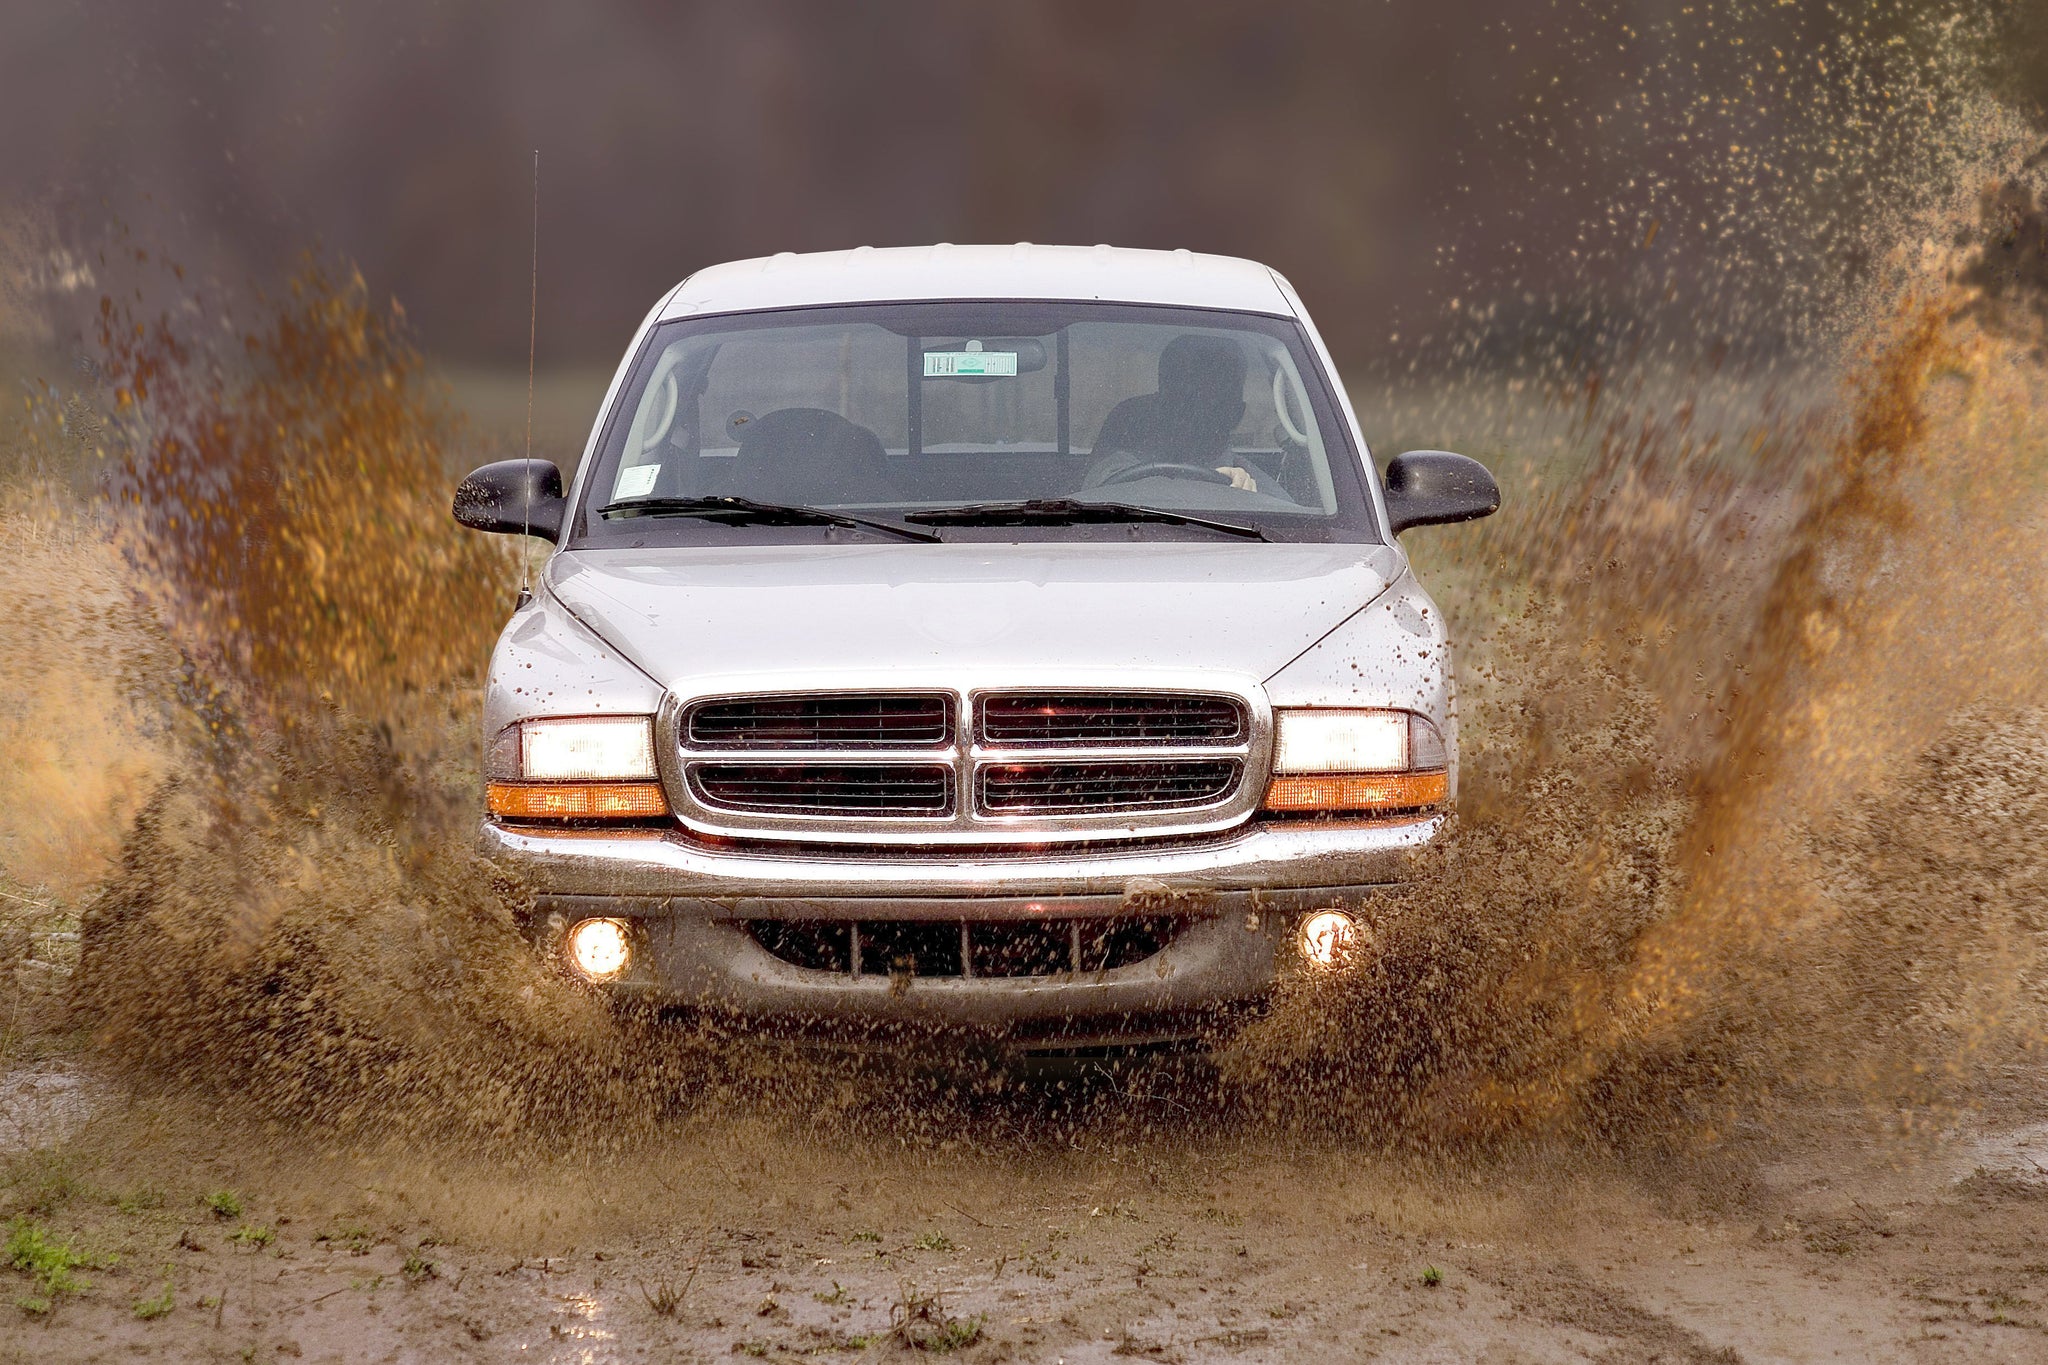 4 Tips For Cleaning Up After Going Mudding